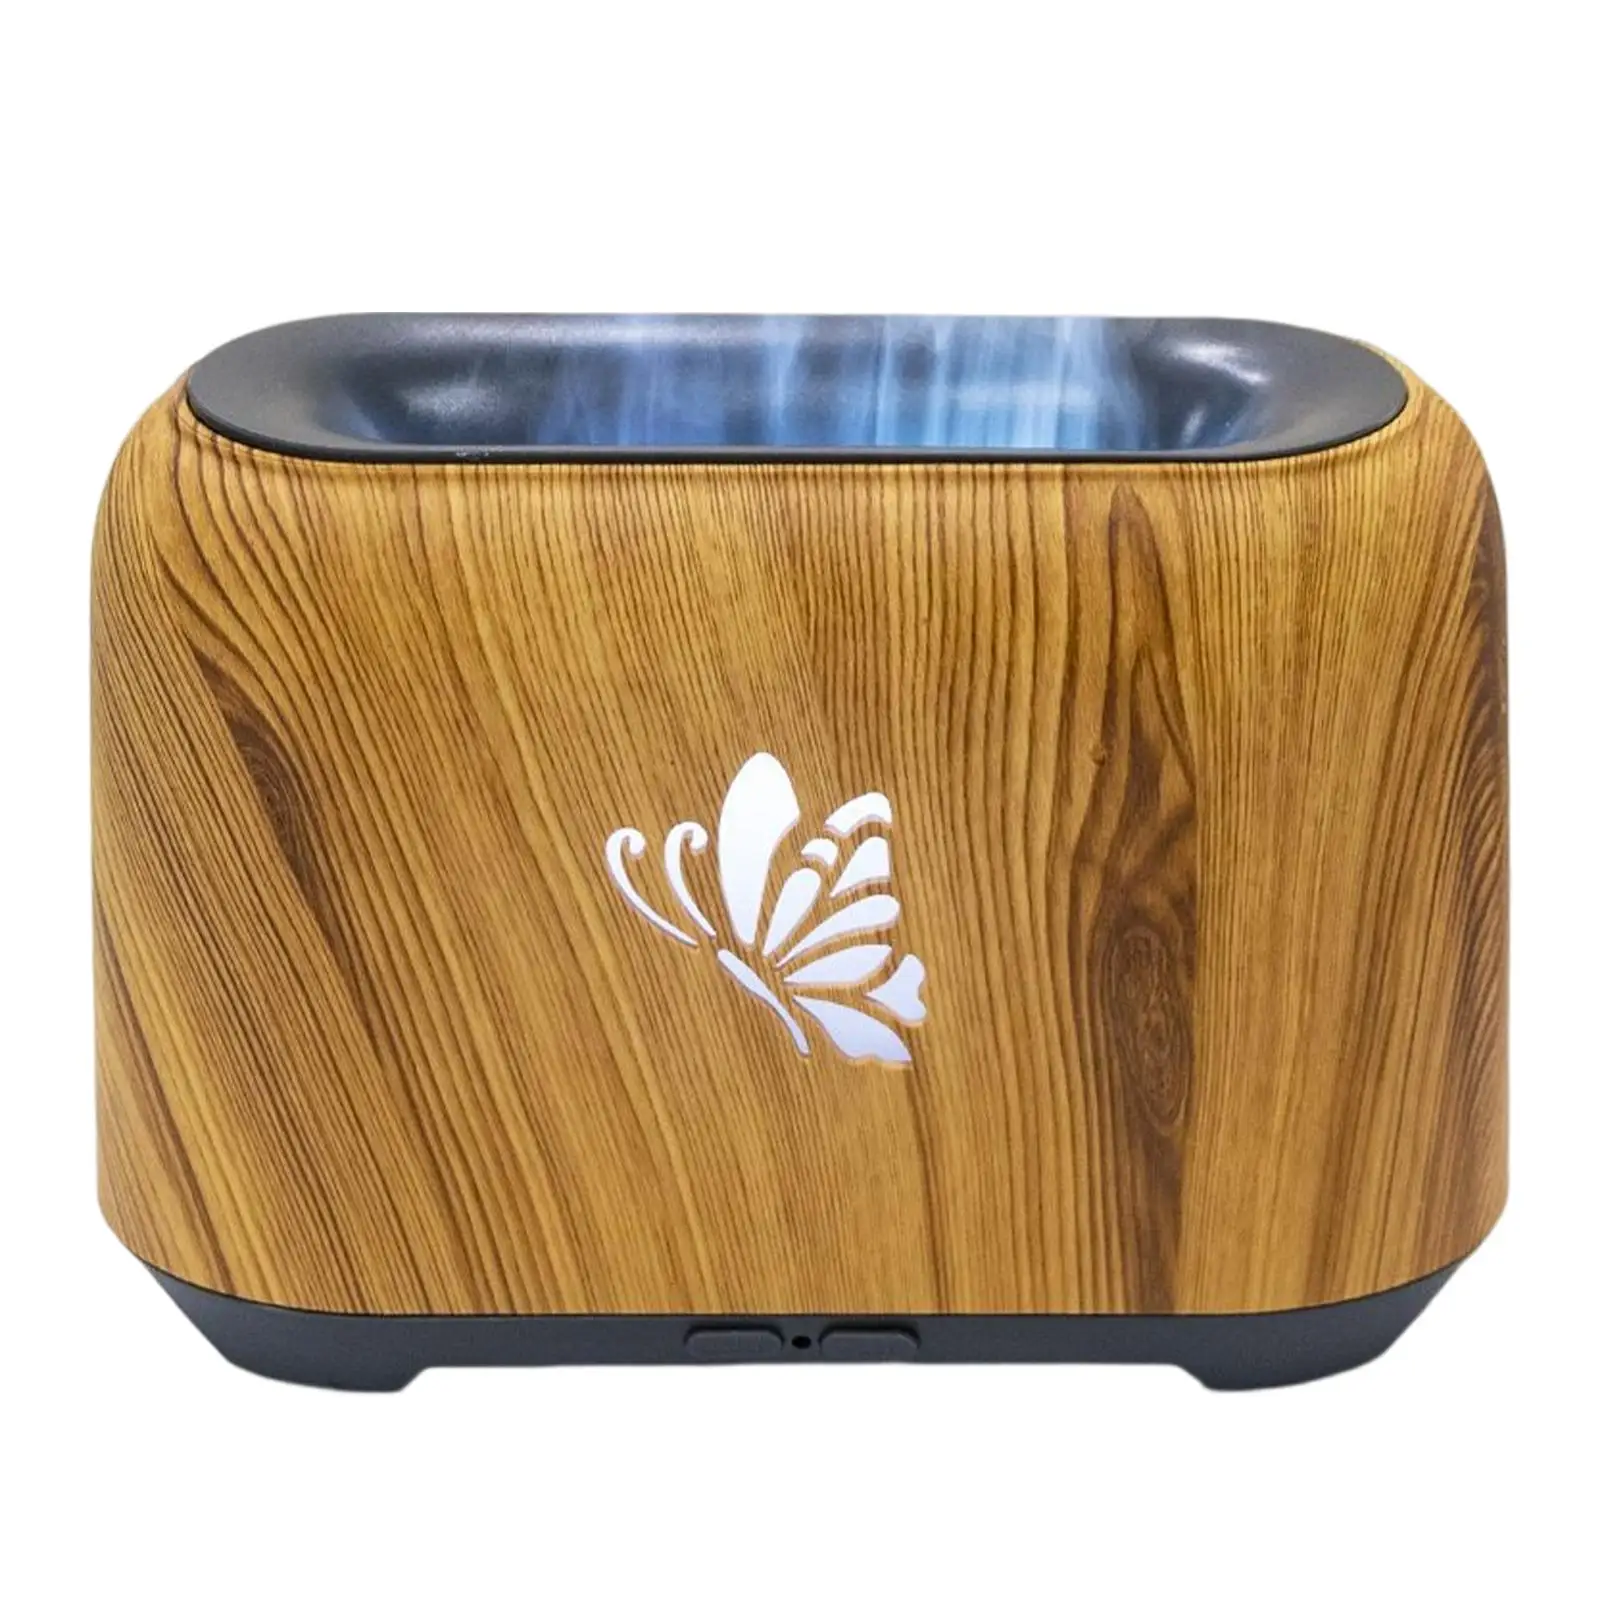 Flame Essential Oil Diffuser Aroma Diffuser Colorful Lights Simulation Flame Lamp Effect Air Humidifier for Home Office Bedroom